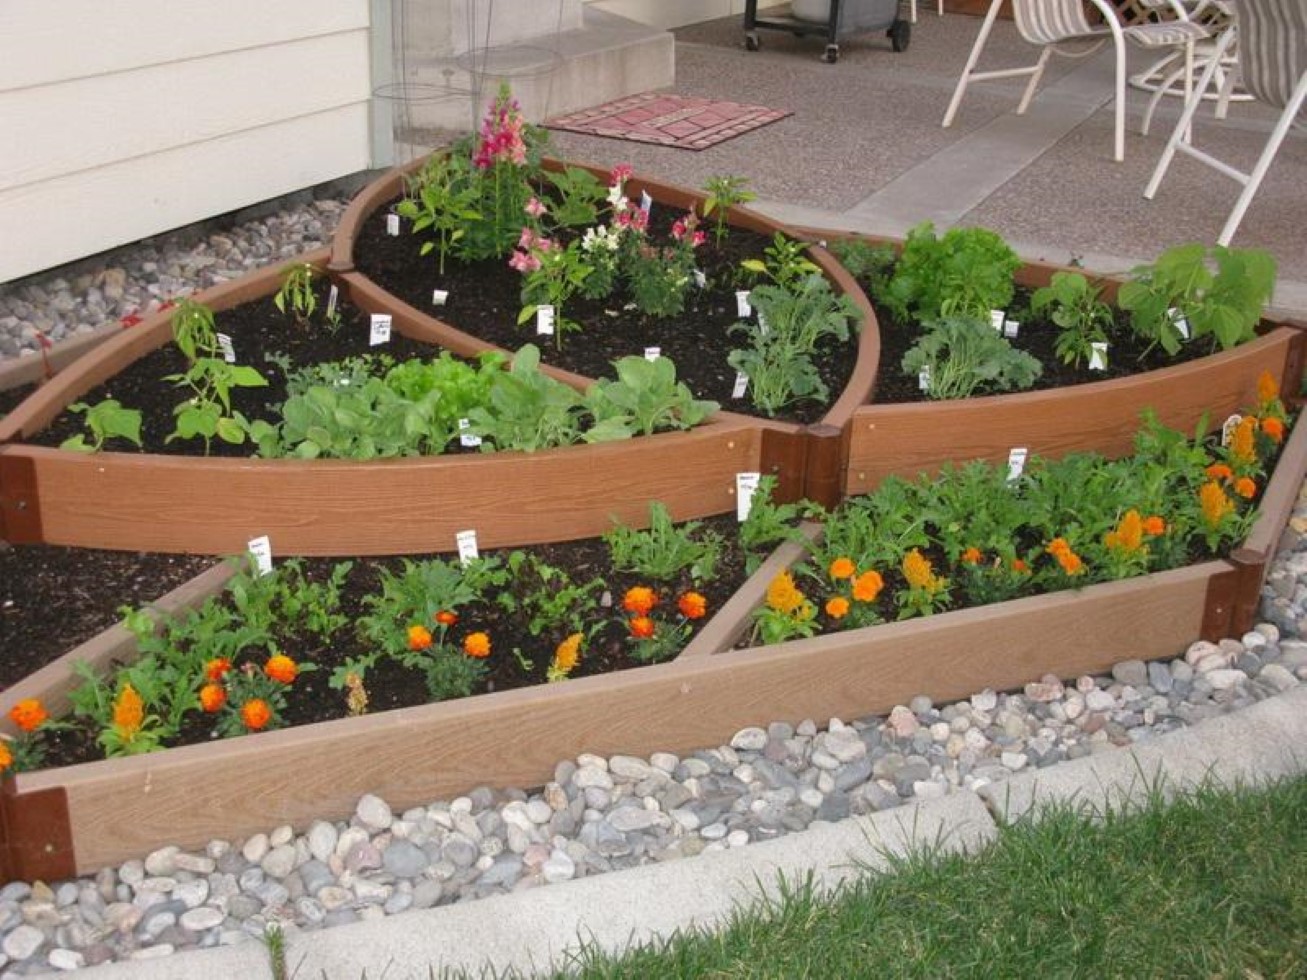 Of Awesome Garden Image Of Awesome Small Vegetable Garden Idea With Unique Shaped Seedbed Using Wood Material Plus Cute Pebbles Decoration Garden Simple Vegetable Garden Ideas For Your Living